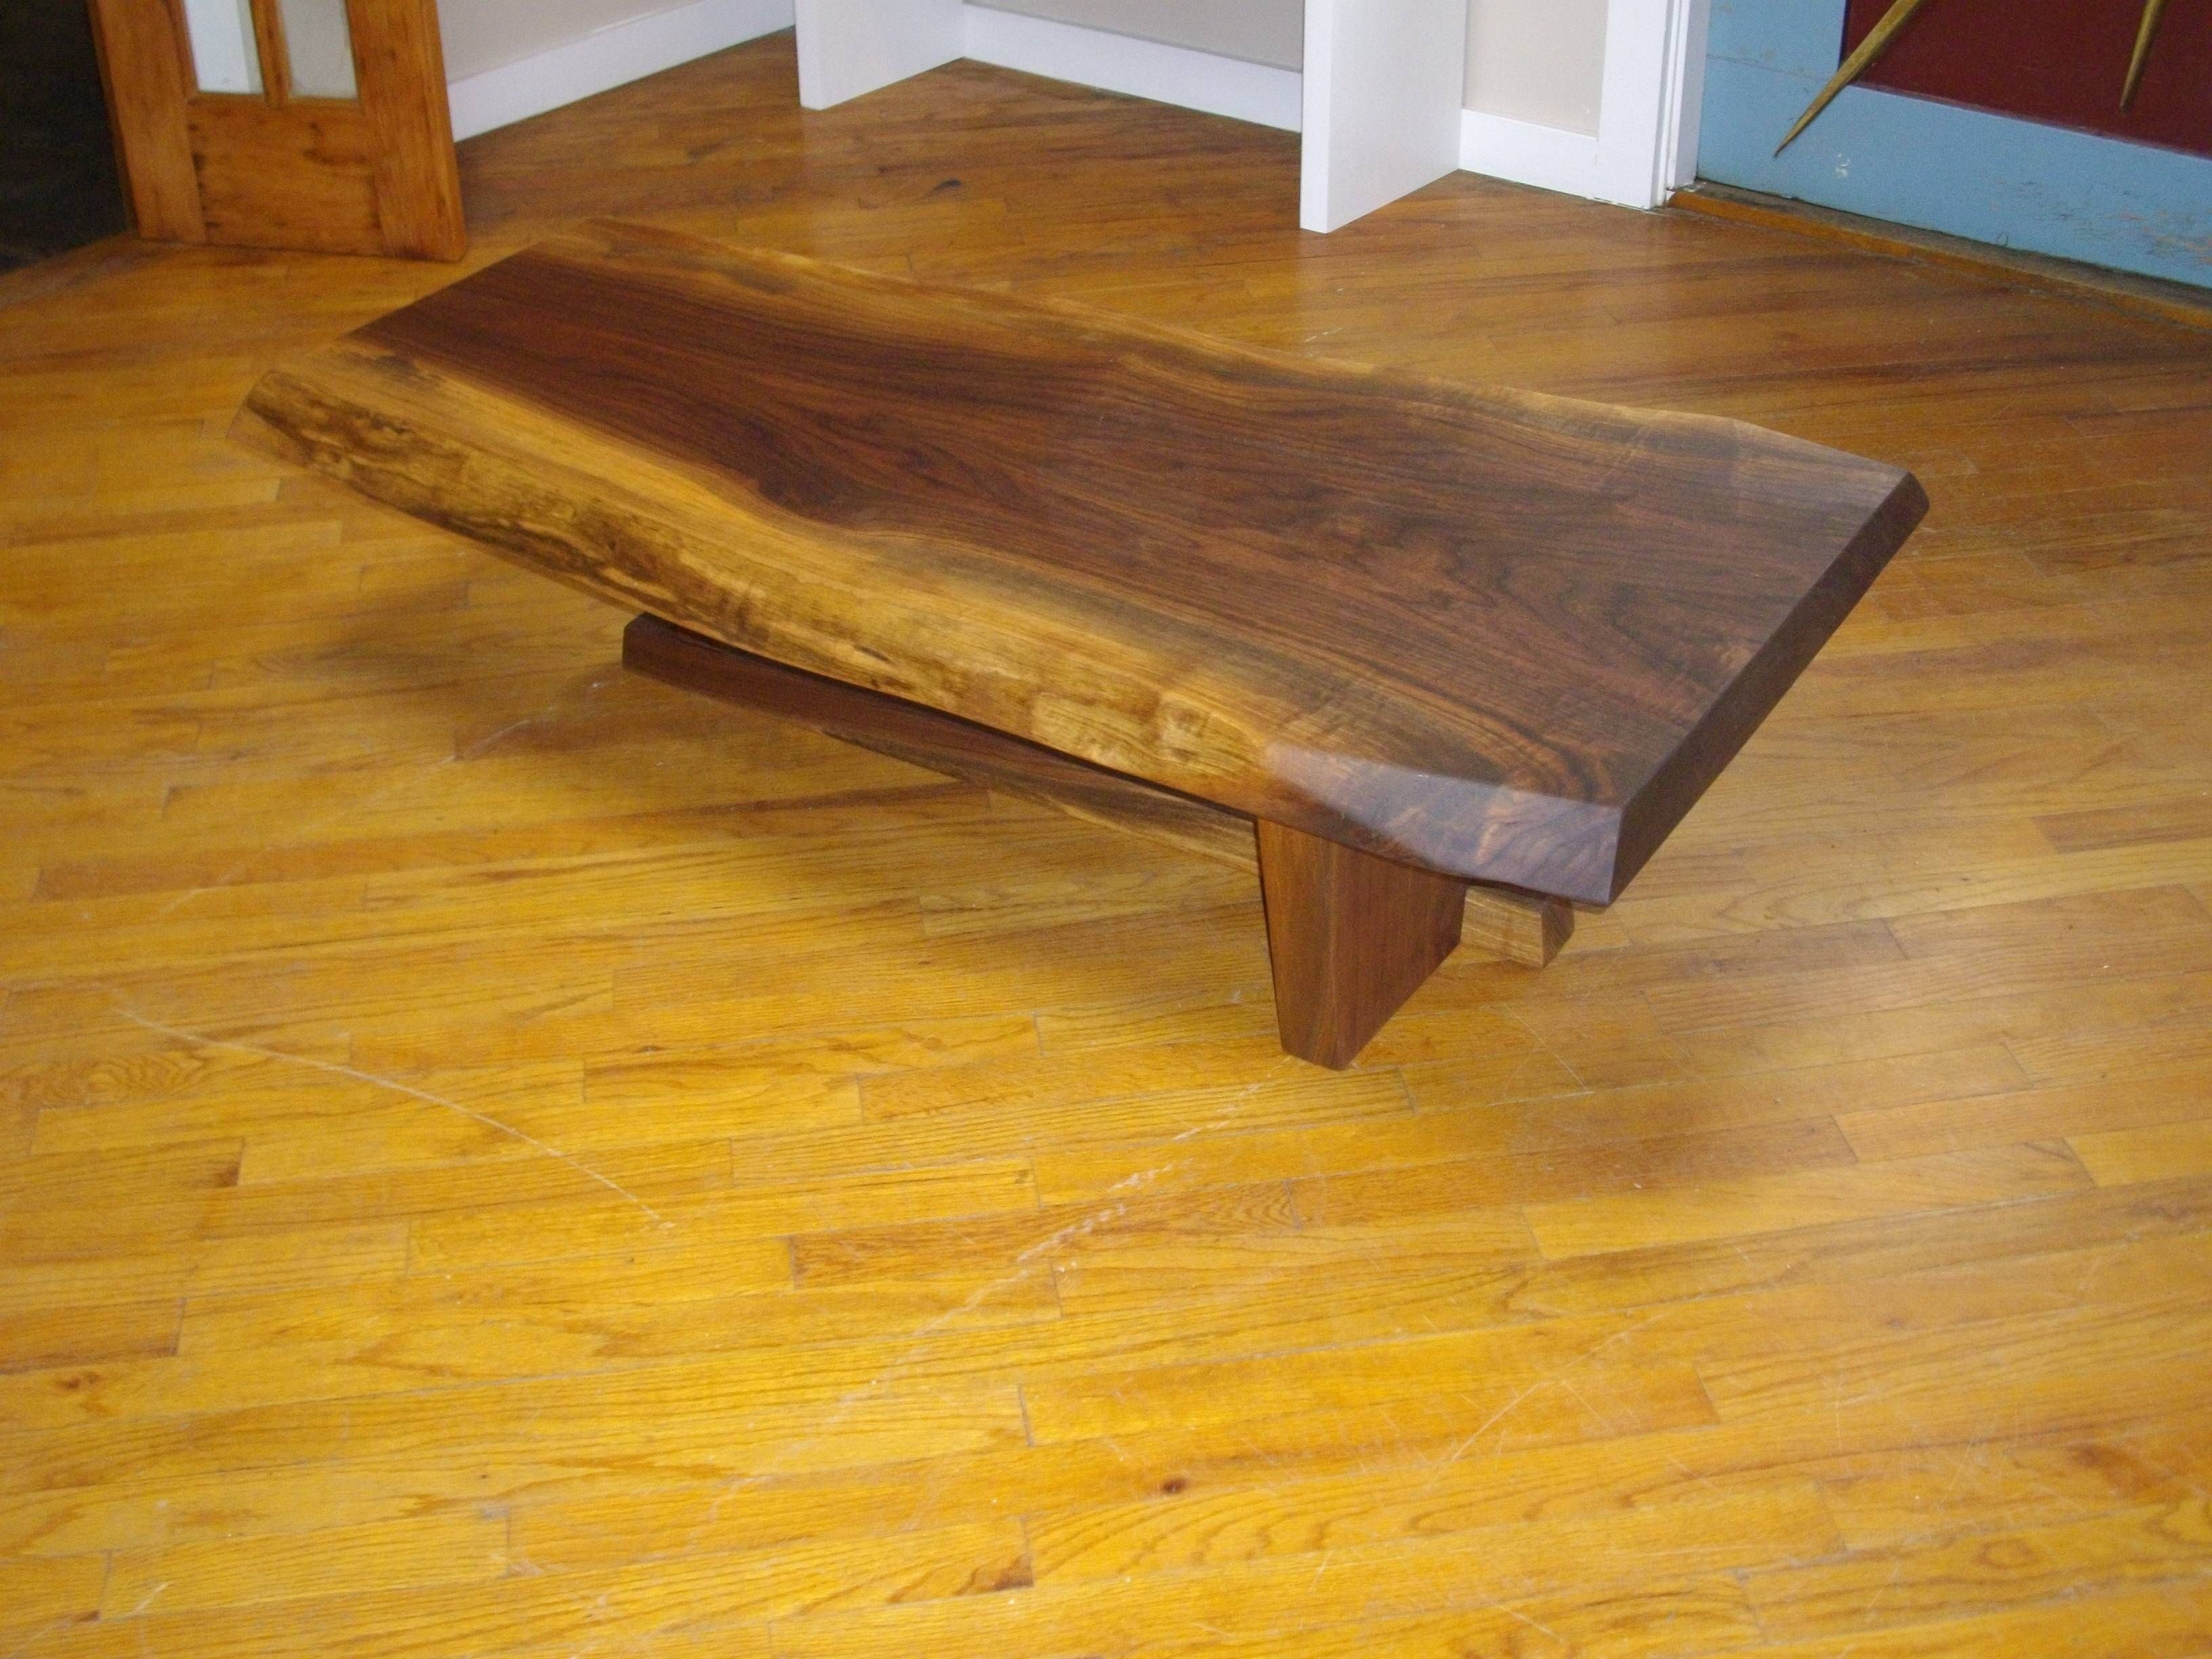 Solid Wood Coffee Table Canada – Home Interior Design Ideas | Home Throughout Solid Wood Coffee Tables (View 10 of 30)